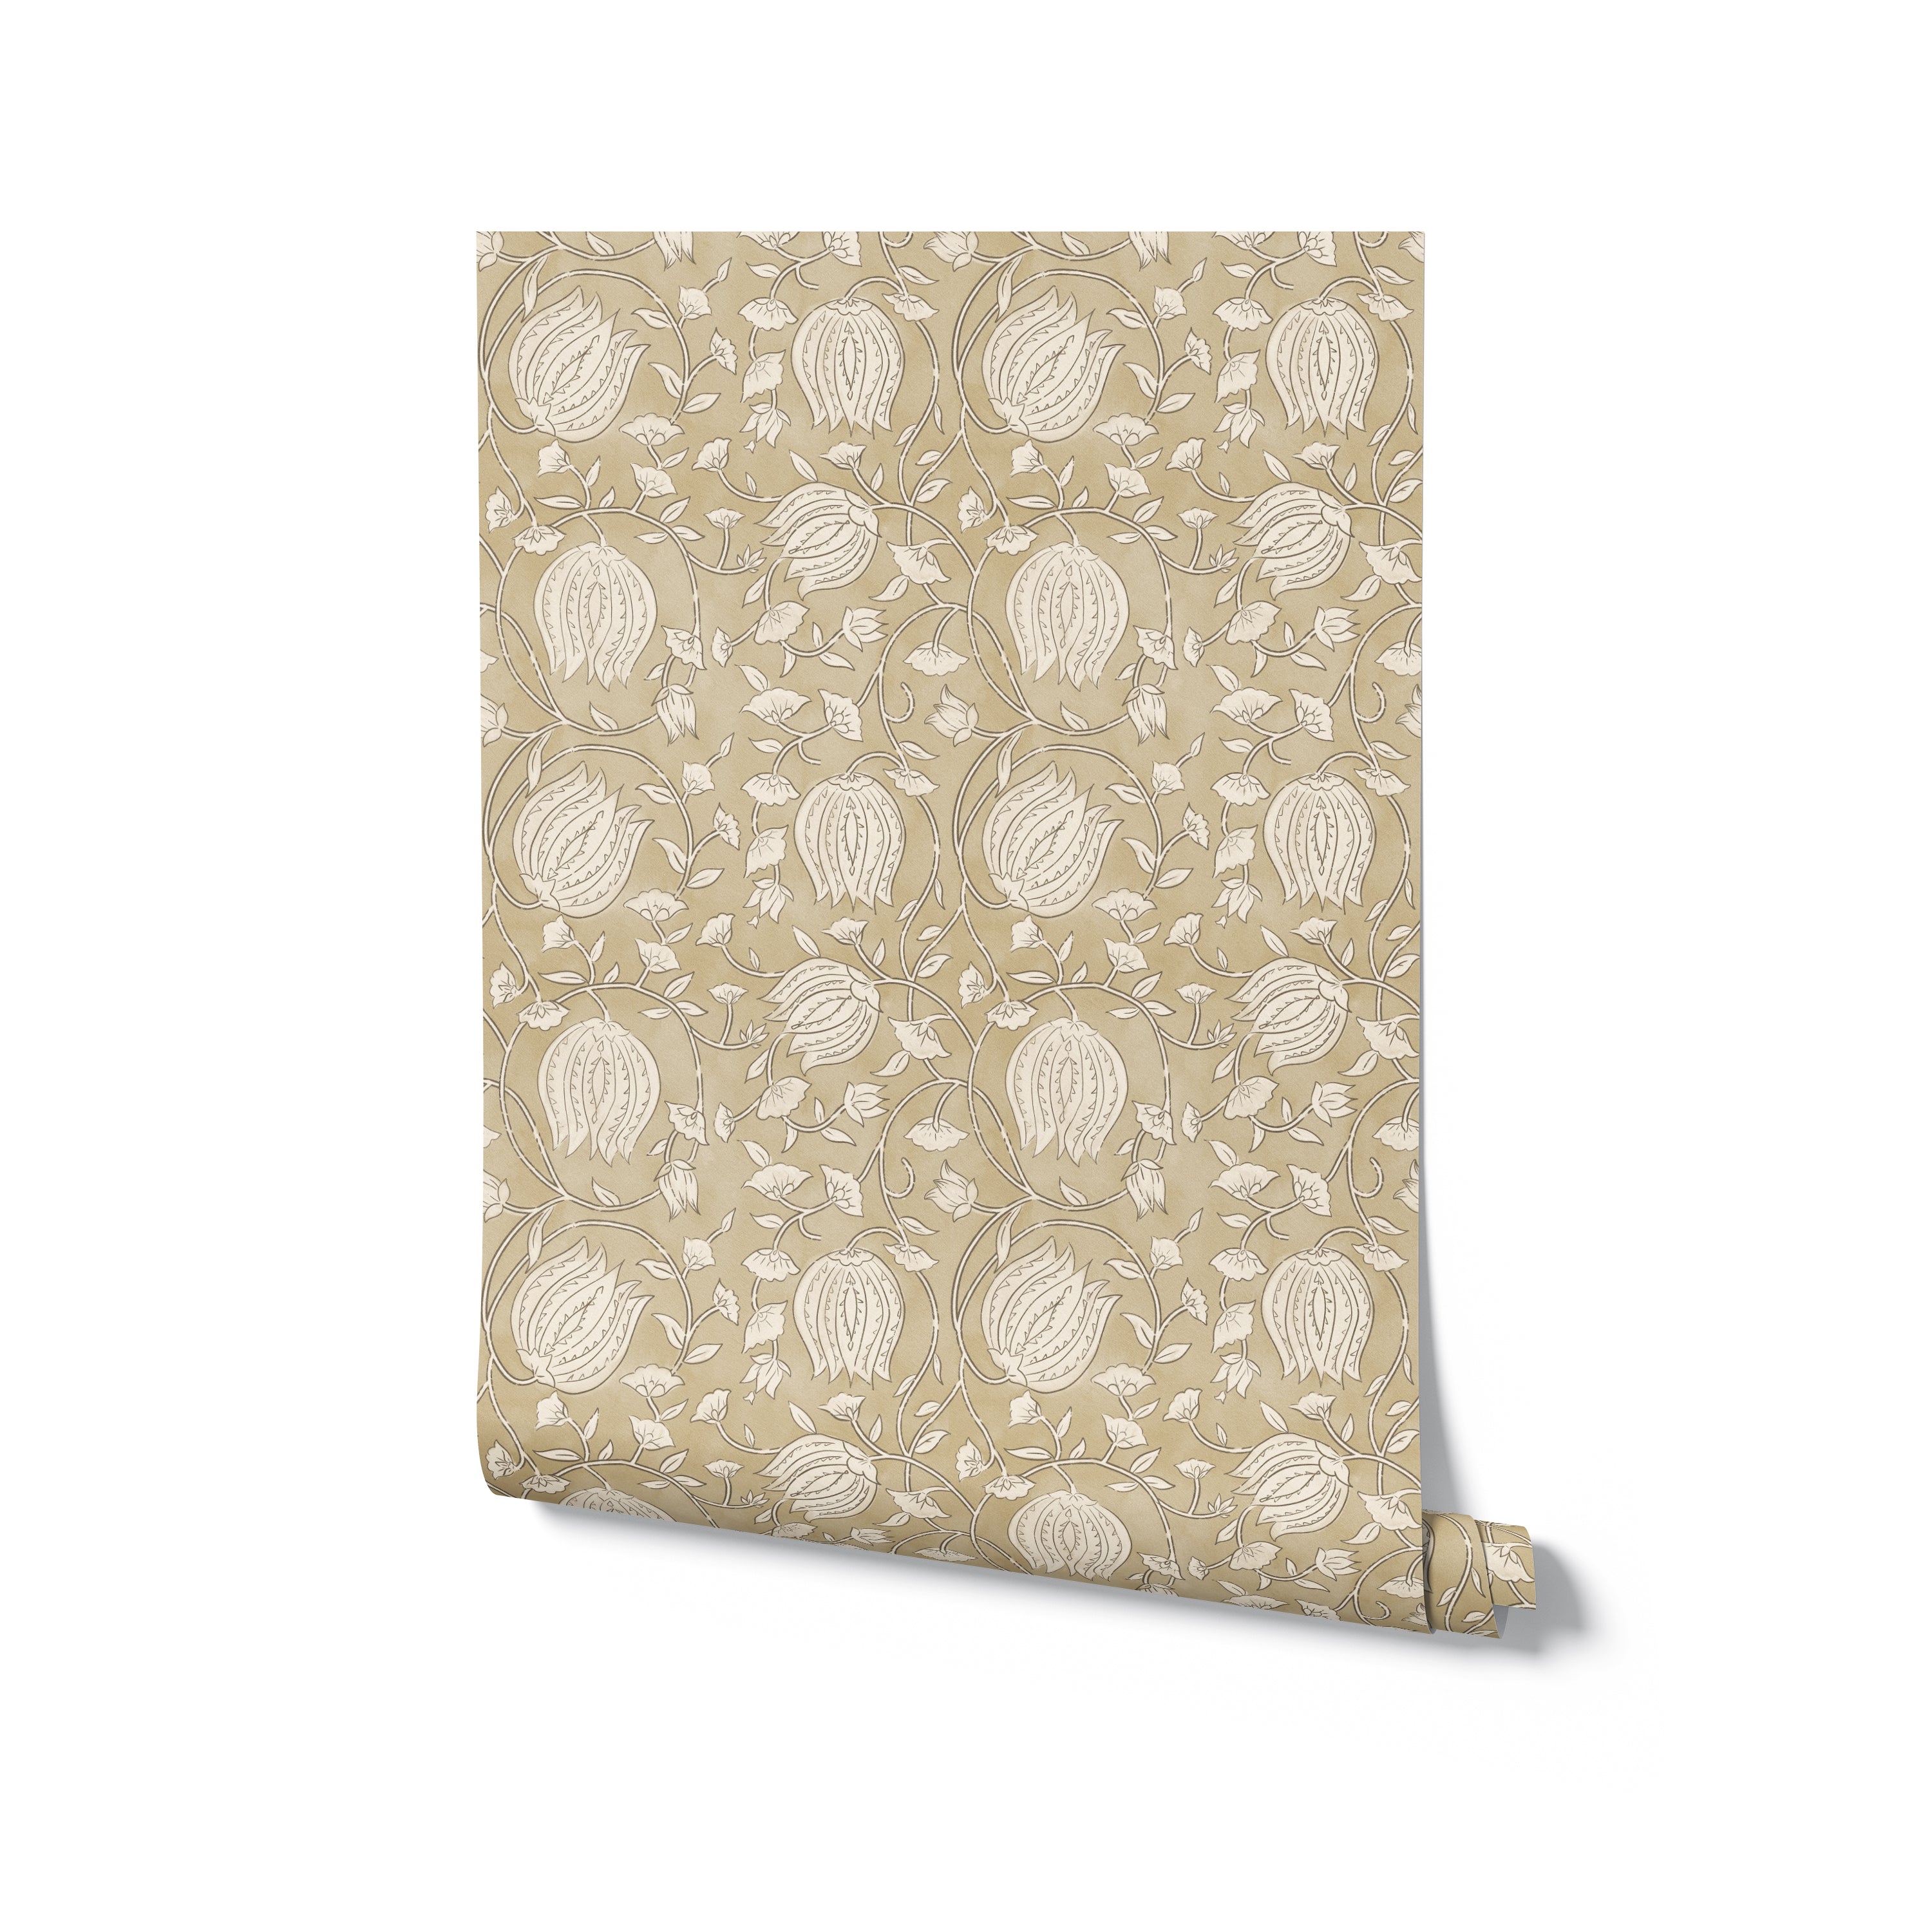 A roll of mustard-colored Cornflower Wallpaper, unfurled to reveal a detailed pattern of beige and off-white botanicals intertwined in a classic design. This wallpaper exudes an elegant and timeless appeal, suitable for diverse interior styles.